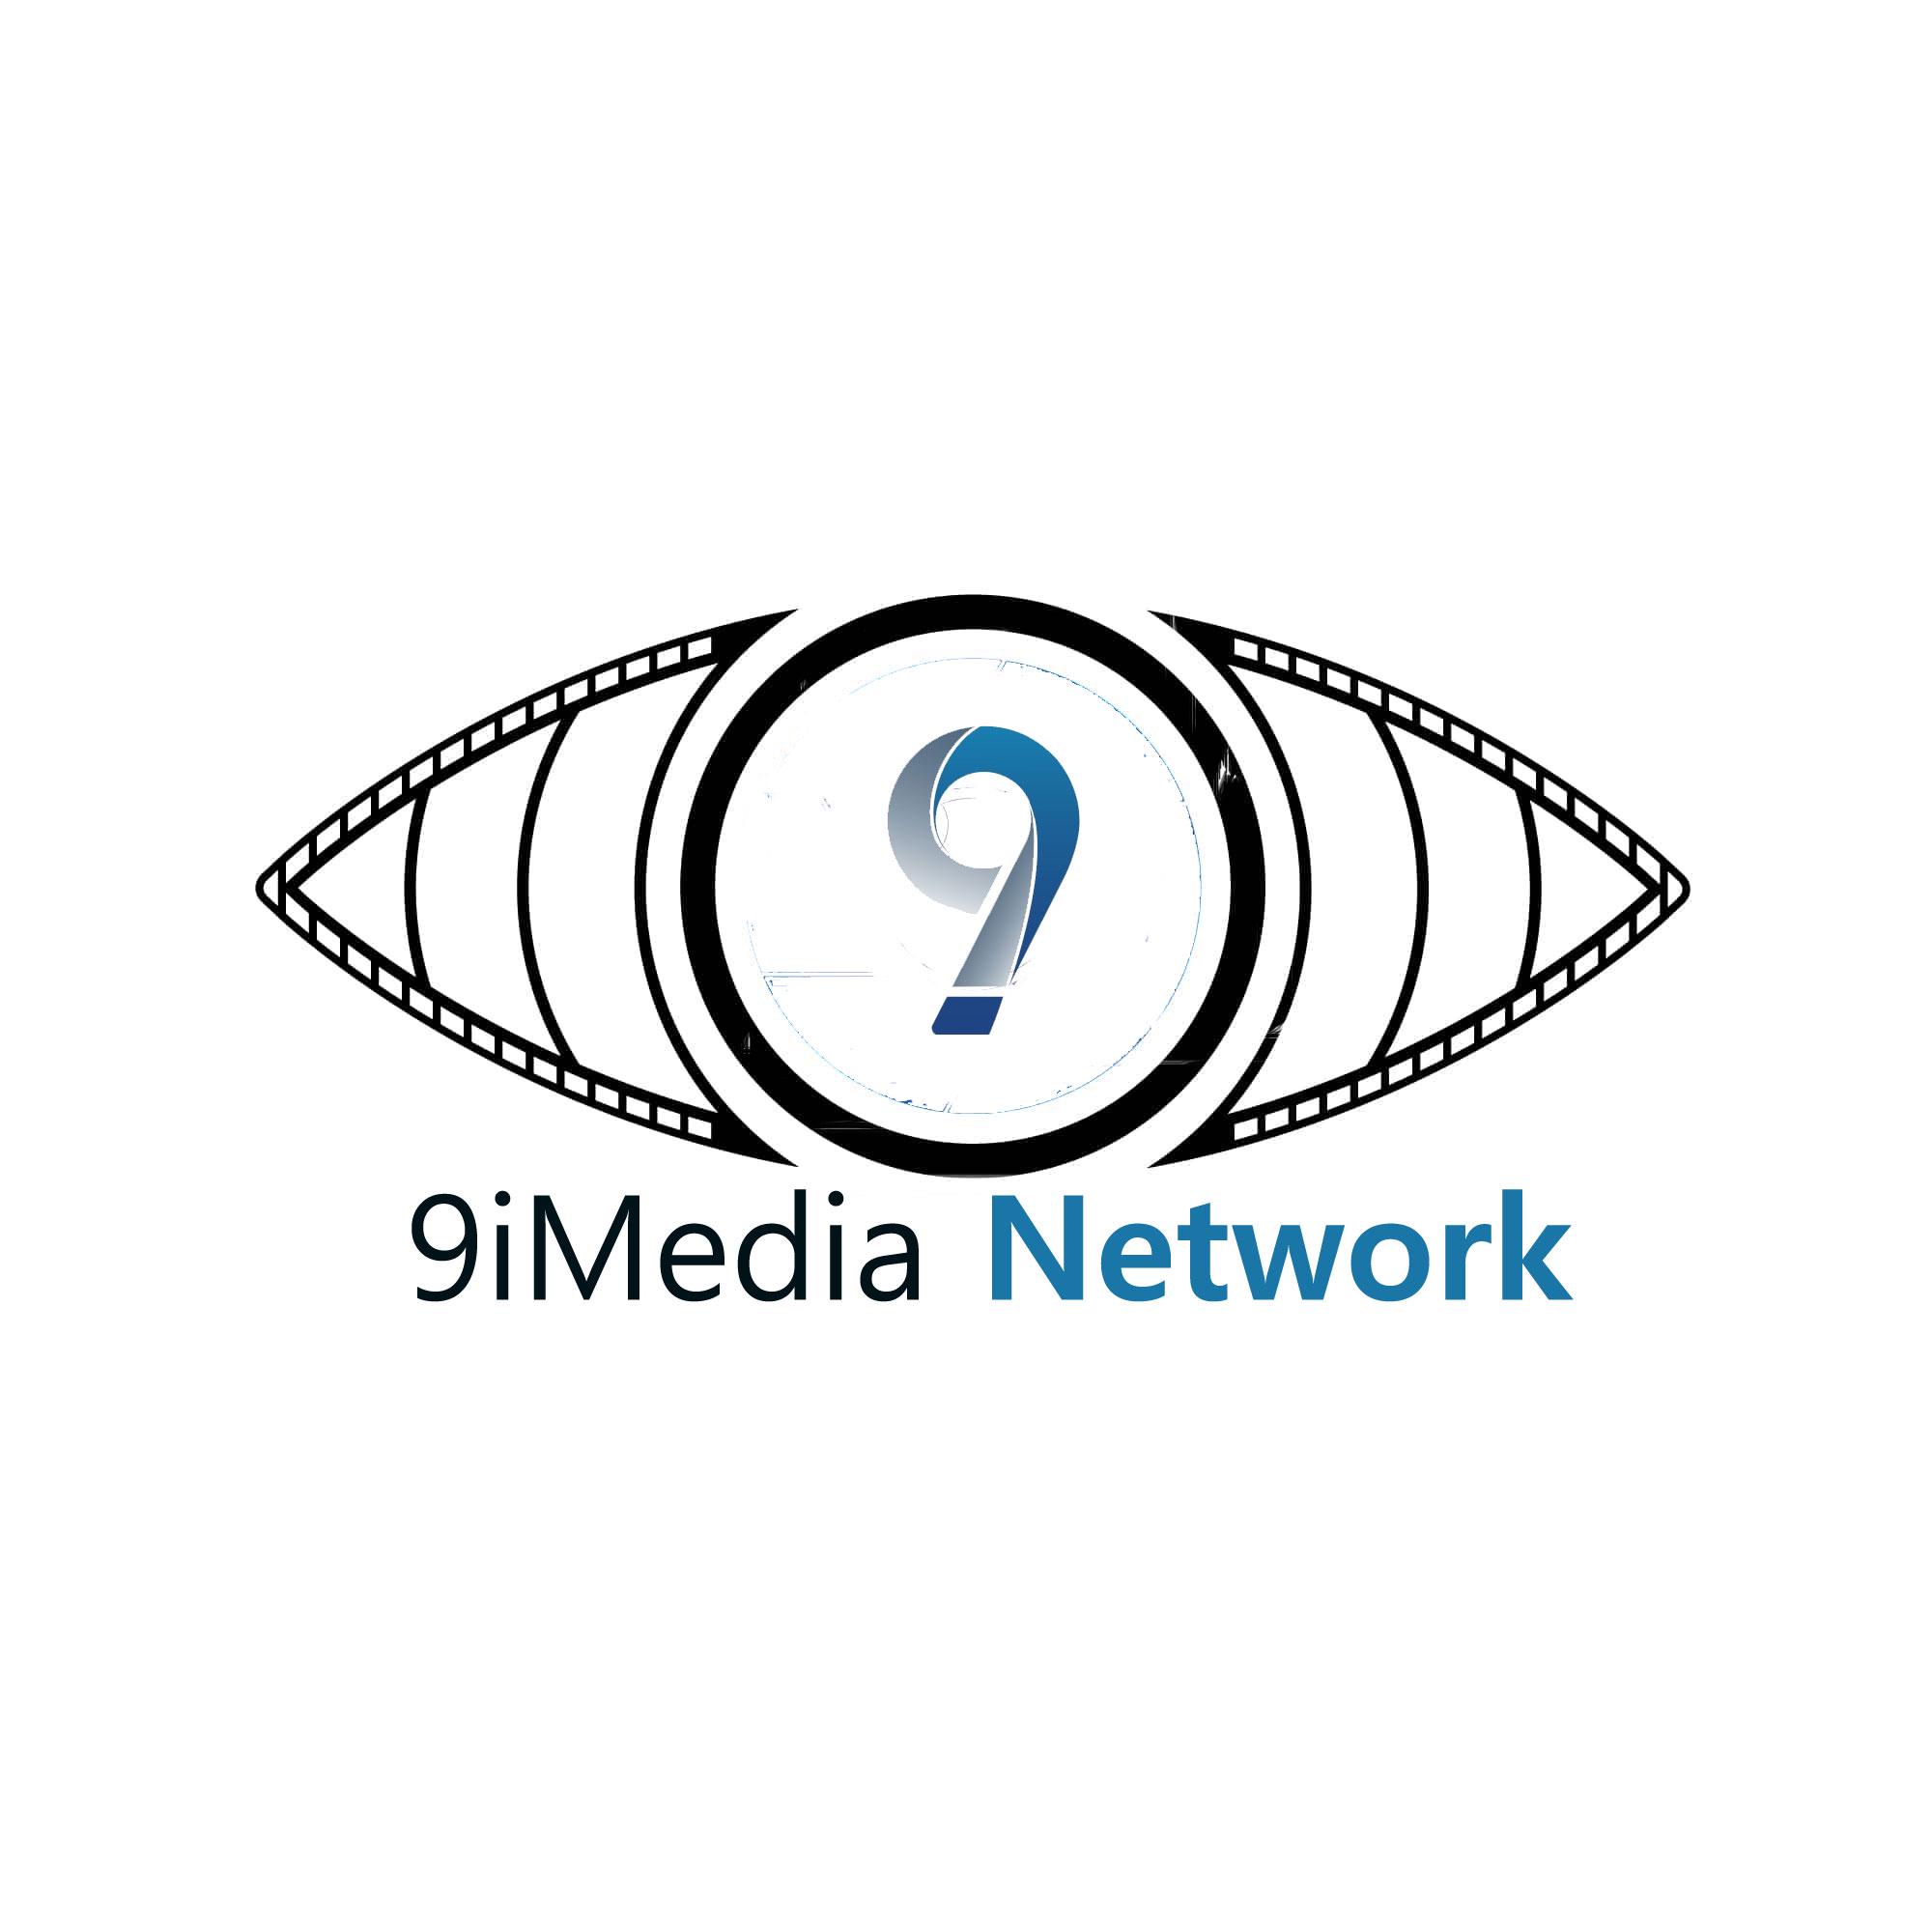 9imedia Network profile on Qualified.One